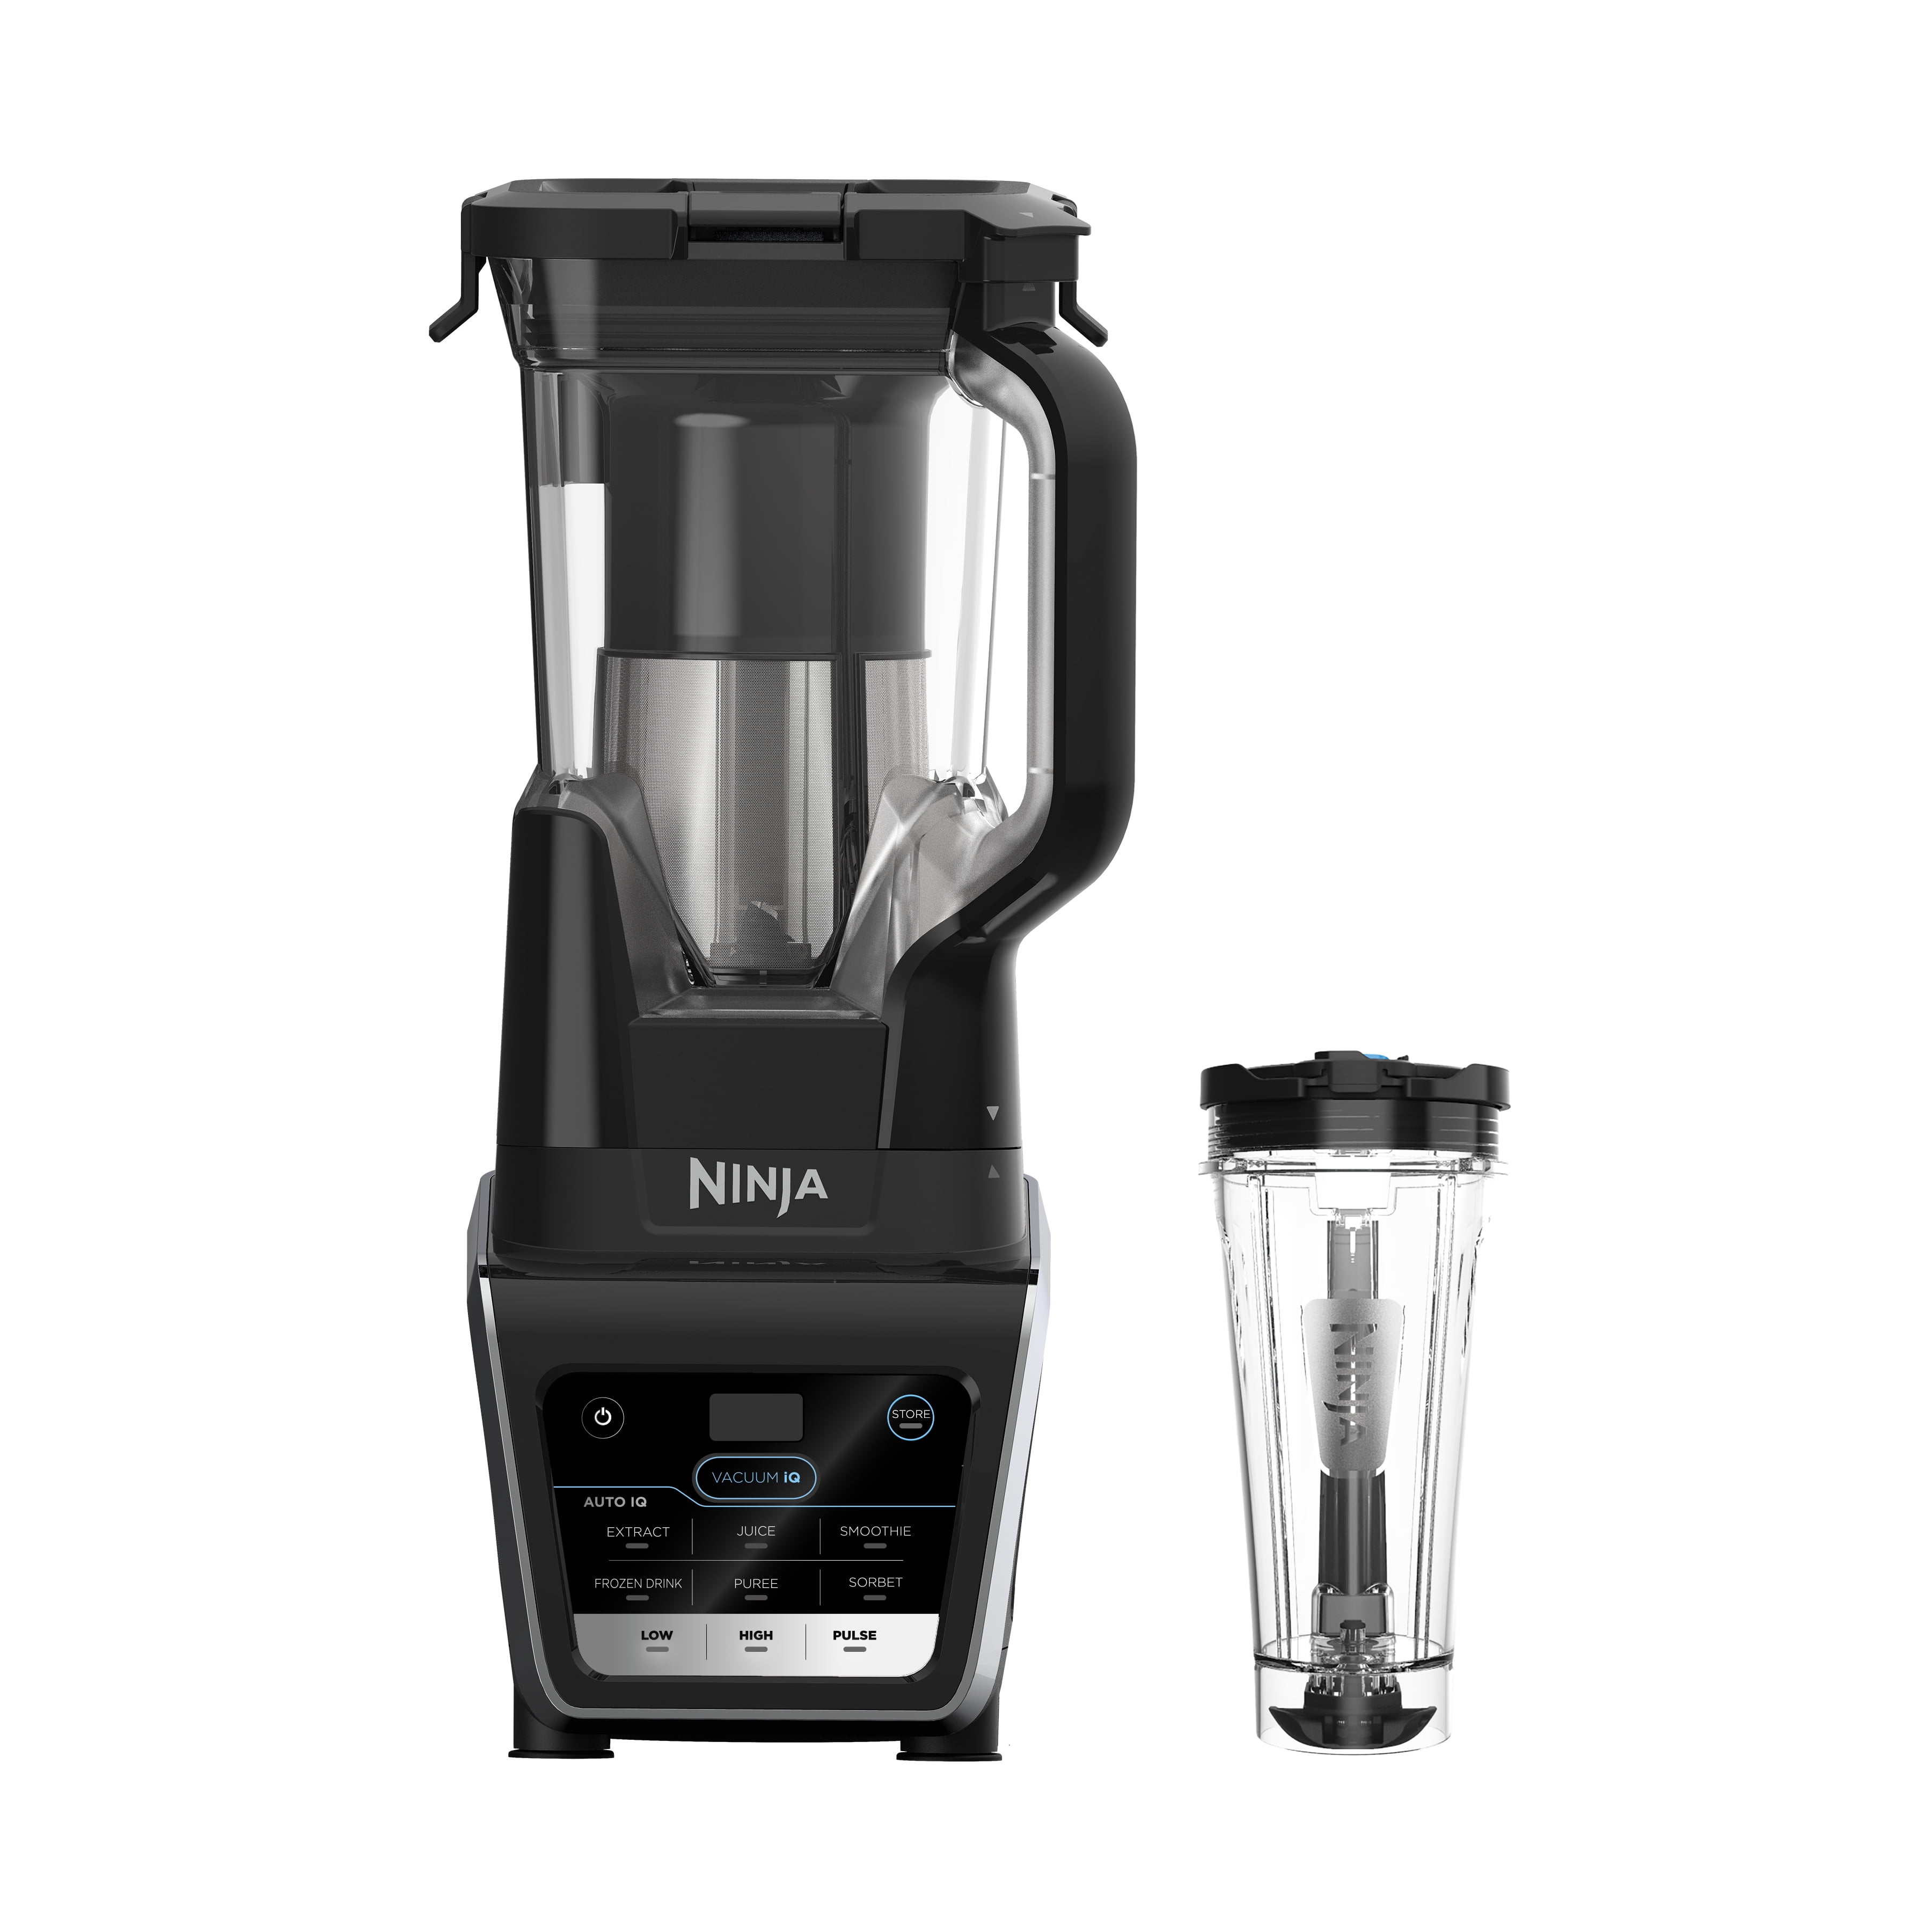 New Ninja Juicer Full Review and Demo 